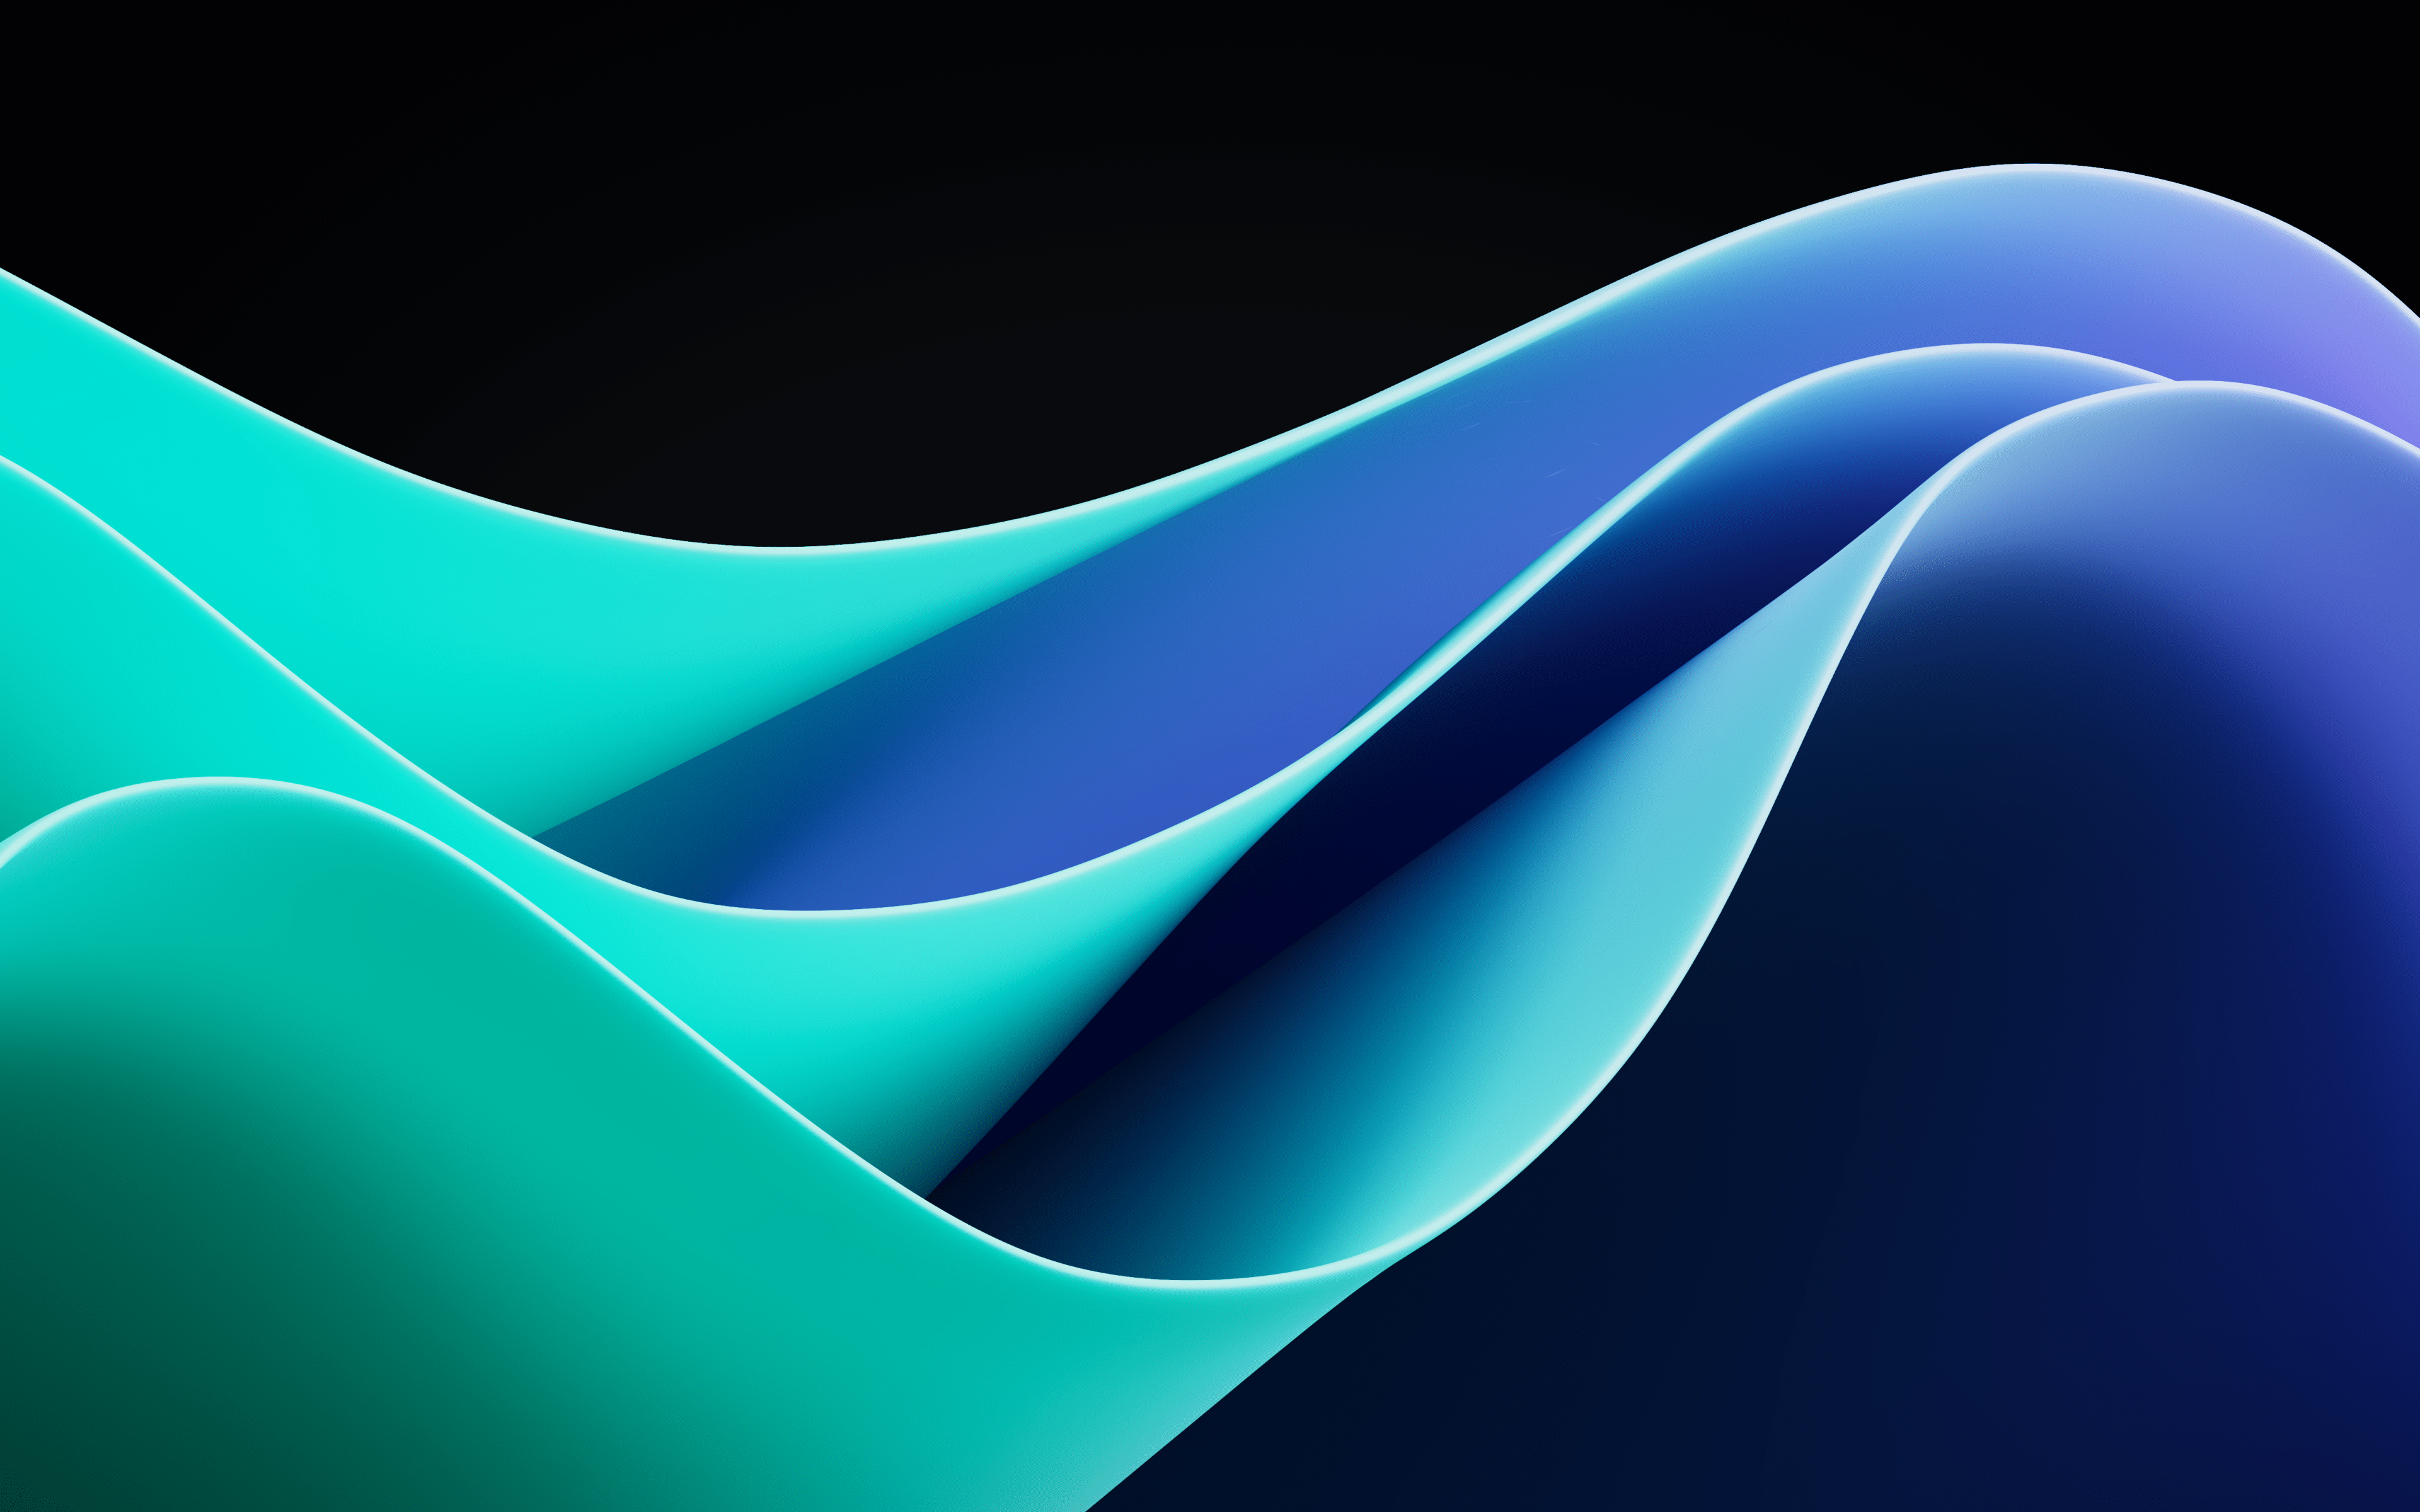 A 3D image of blue and green waves - Windows 11